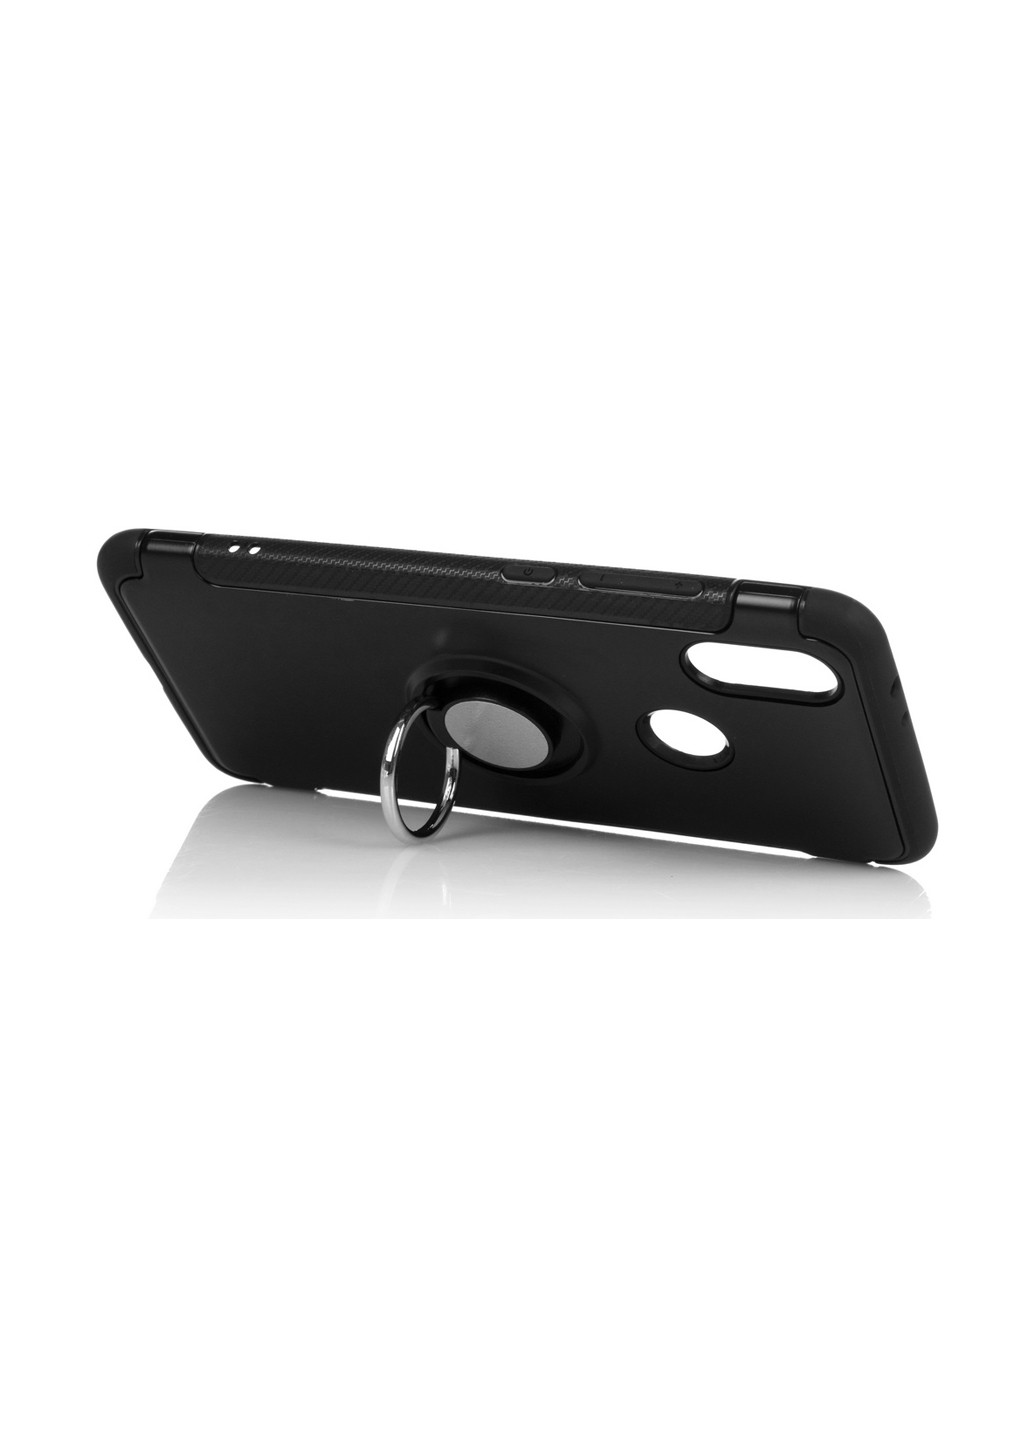 Чехол Magnetic Ring Stand для Xiaomi Redmi Note 6 Pro Black (703089) BeCover magnetic ring stand для xiaomi redmi note 6 pro black (703089) (147838020)